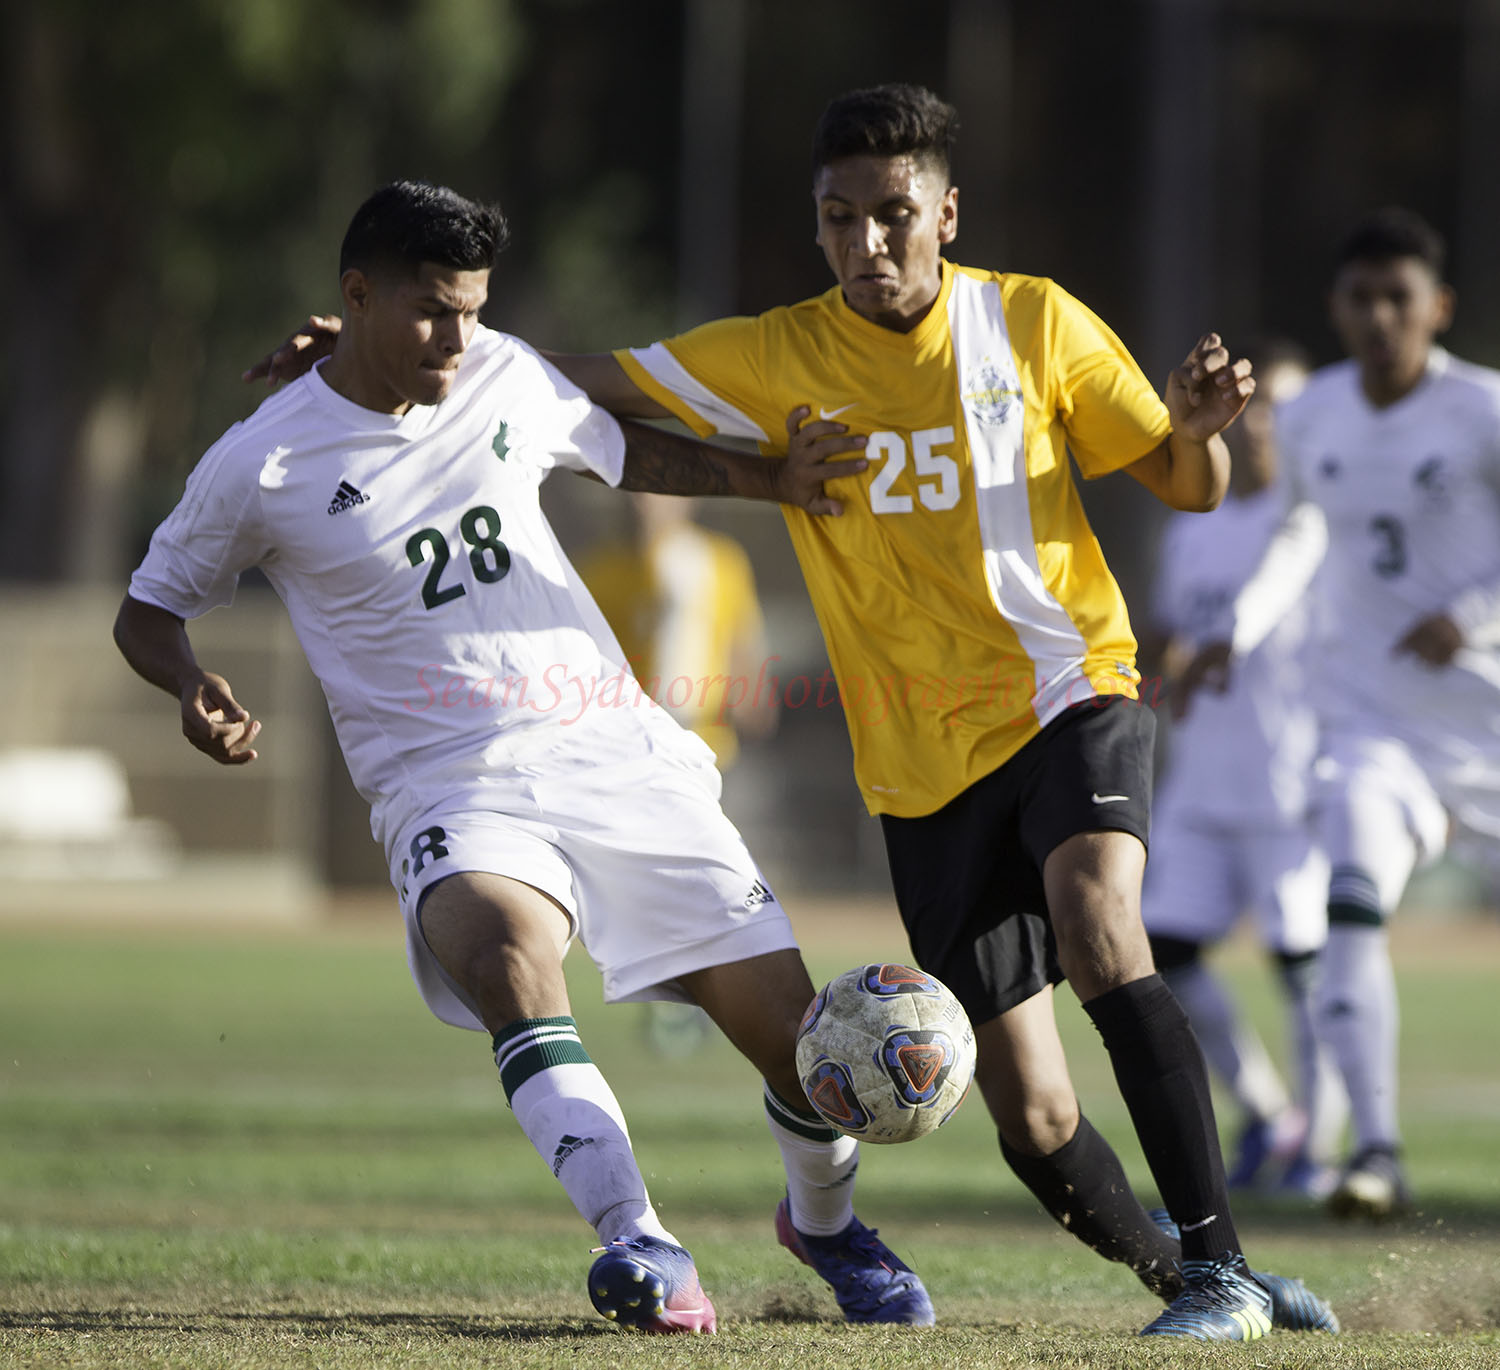 Escudero and Vargas Score to Send Rustlers to 2nd Round